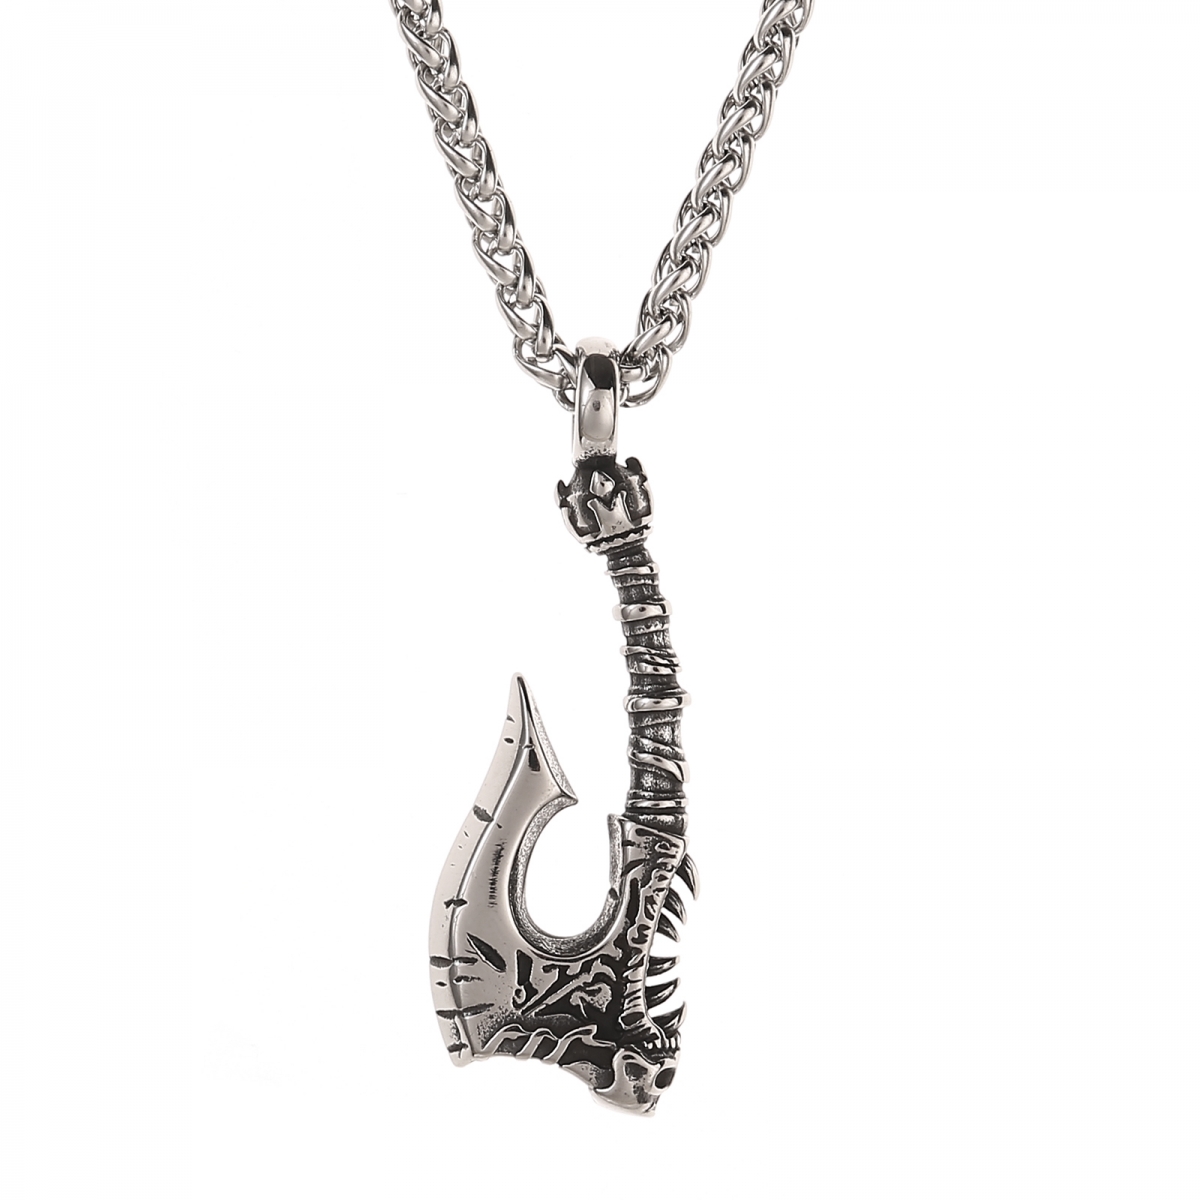 Axe Necklace US$2.9/PC-NORSECOLLECTION- Viking Jewelry,Viking Necklace,Viking Bracelet,Viking Rings,Viking Mugs,Viking Accessories,Viking Crafts